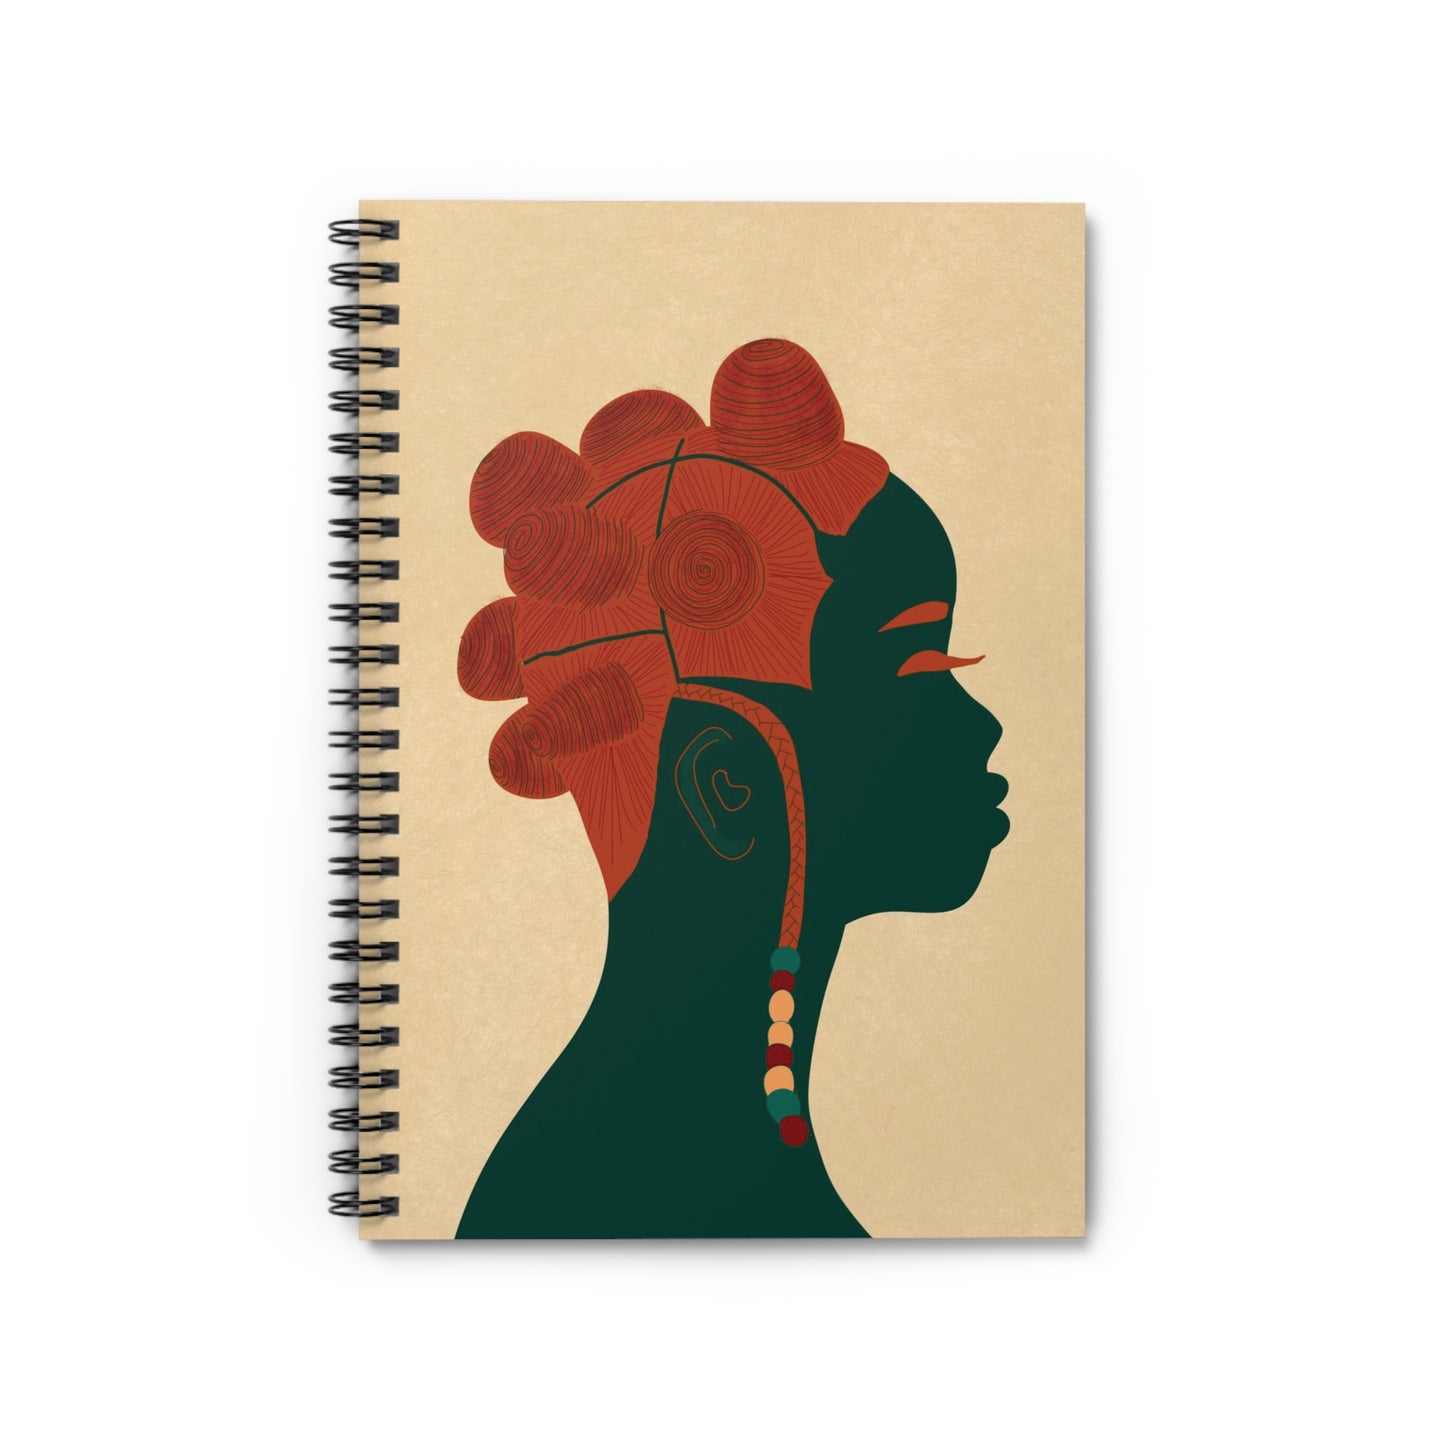 Bantu Knots Spiral Notebook - Ruled Line "Don't Touch My Hair Collection"